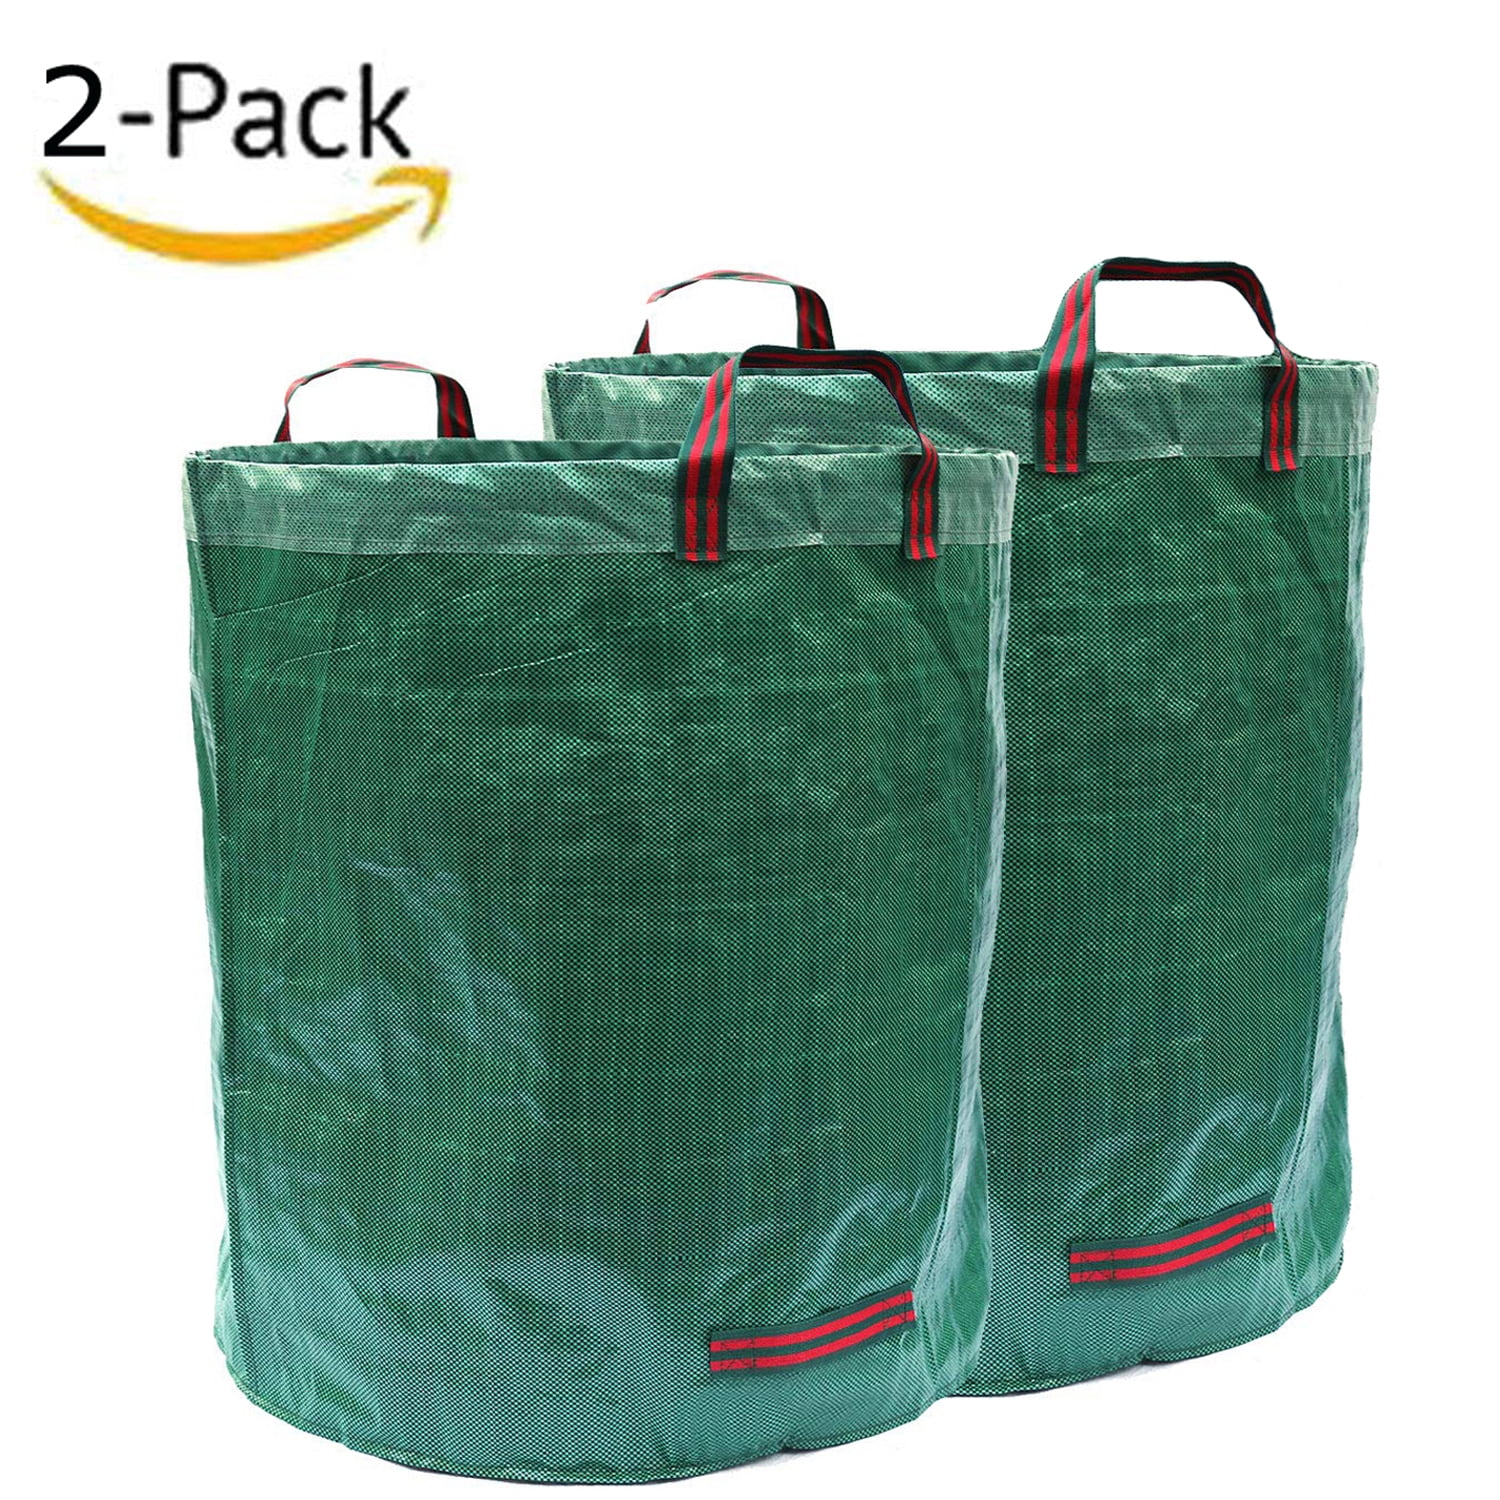 D26.4, H33 Inches 3-Pack 80 Gallons Leaf Bags Reusable Yard Waste Bags Garden Lawn Bags Trash Bags with 4 Handles 